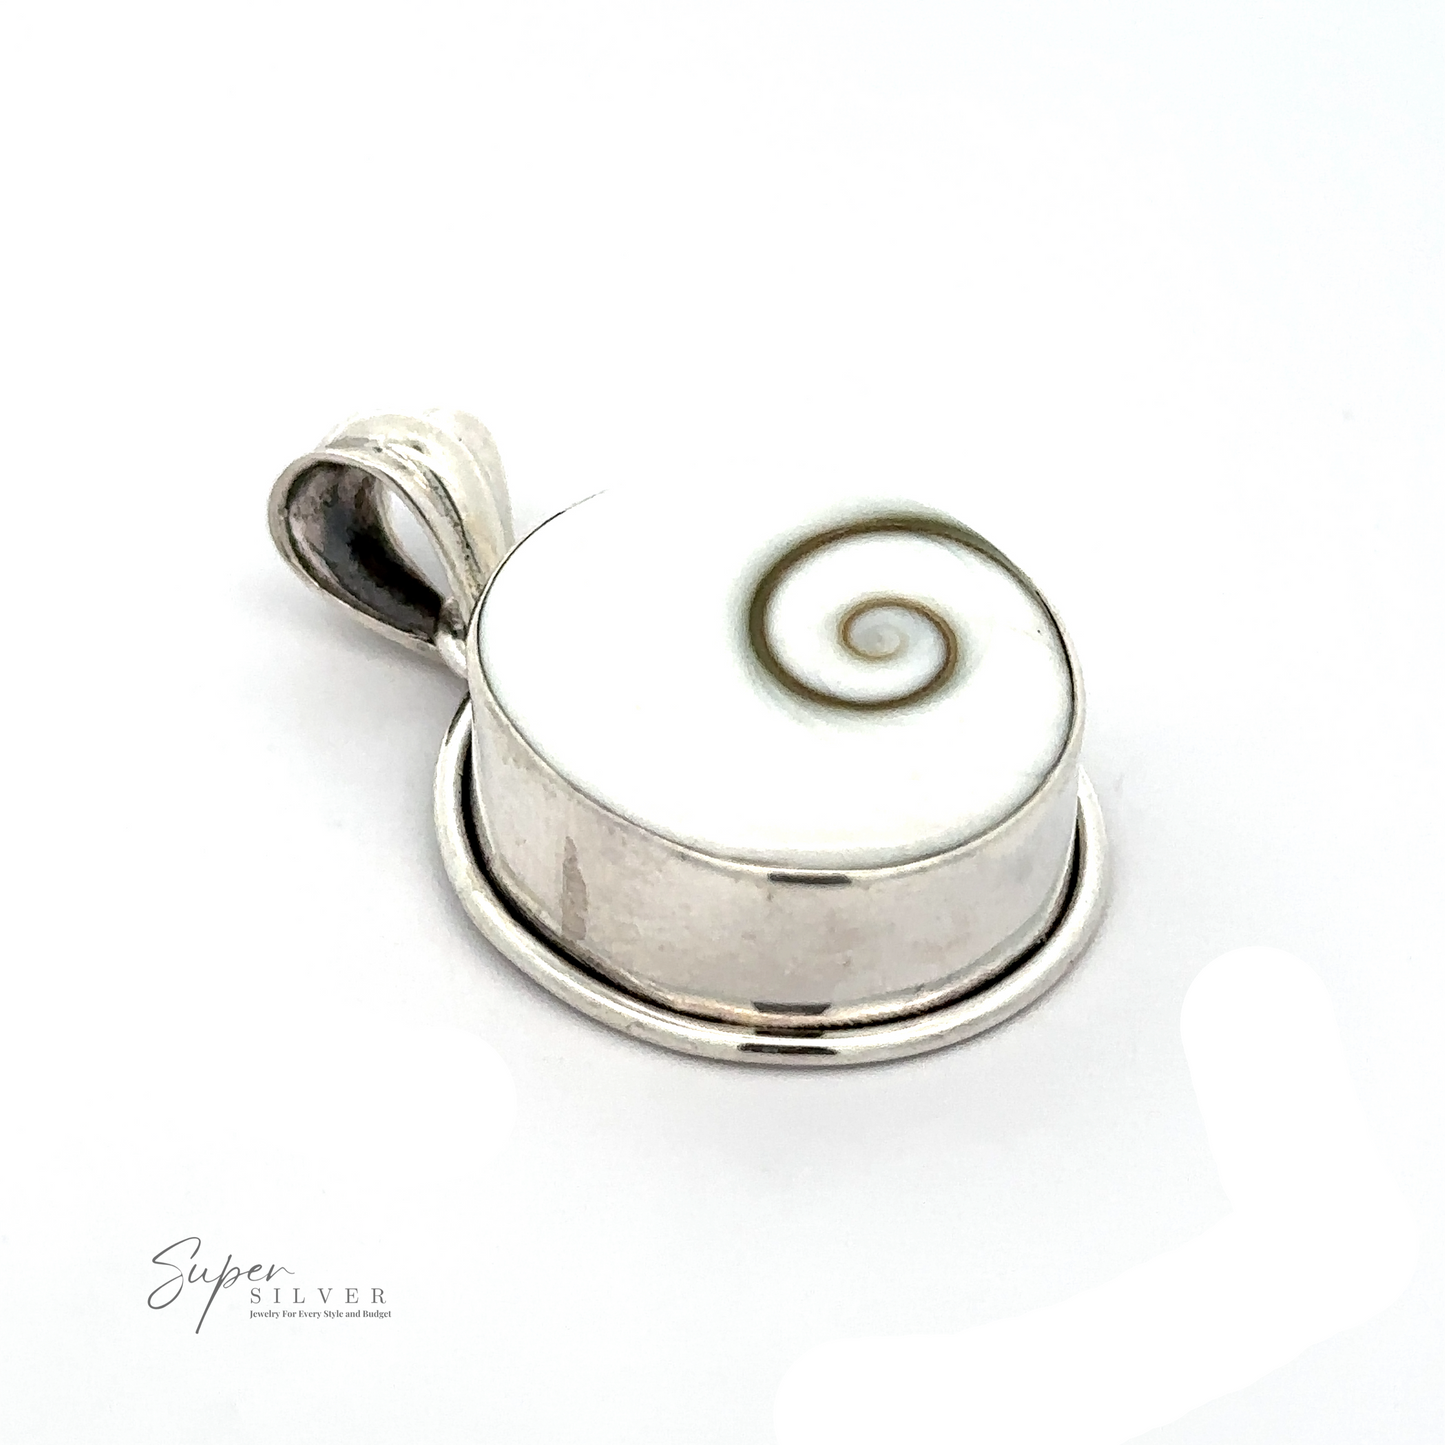 
                  
                    The sentence already contains the given product name "Shiva Shell Pendant." Therefore, no replacement is necessary. The sentence remains:

"A silver pendant with a spiral design, this Shiva Shell Pendant captures the essence of bohemian jewelry, making it a perfect ocean lover accessory.
                  
                